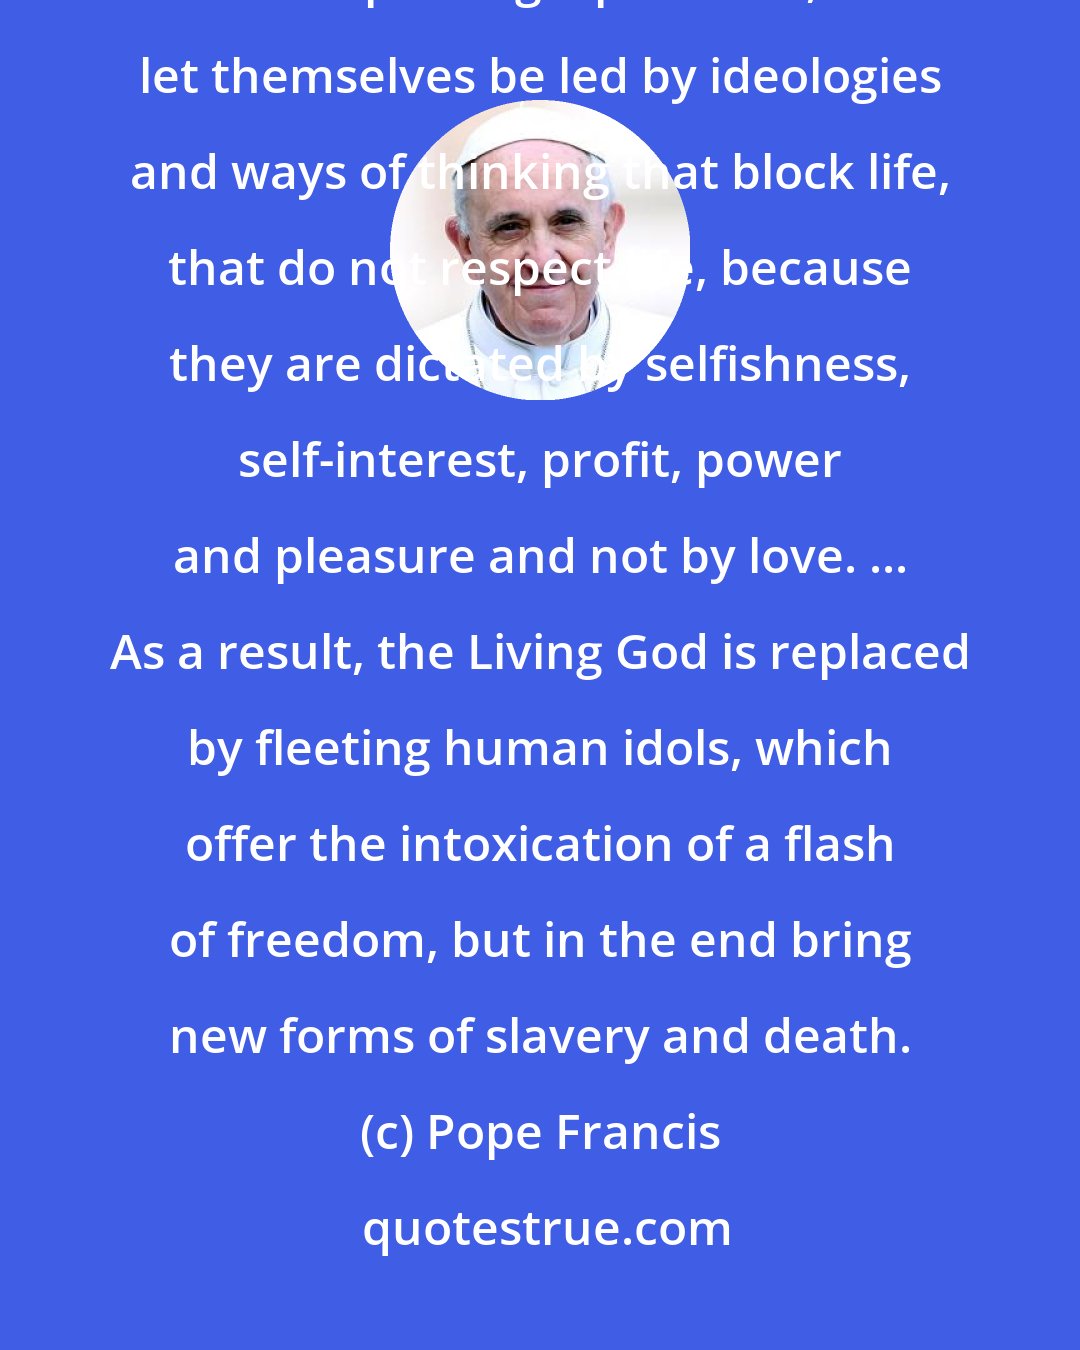 Pope Francis: All too often, as we know from experience, people do not choose life; they do not accept the gospel of life, but let themselves be led by ideologies and ways of thinking that block life, that do not respect life, because they are dictated by selfishness, self-interest, profit, power and pleasure and not by love. ... As a result, the Living God is replaced by fleeting human idols, which offer the intoxication of a flash of freedom, but in the end bring new forms of slavery and death.